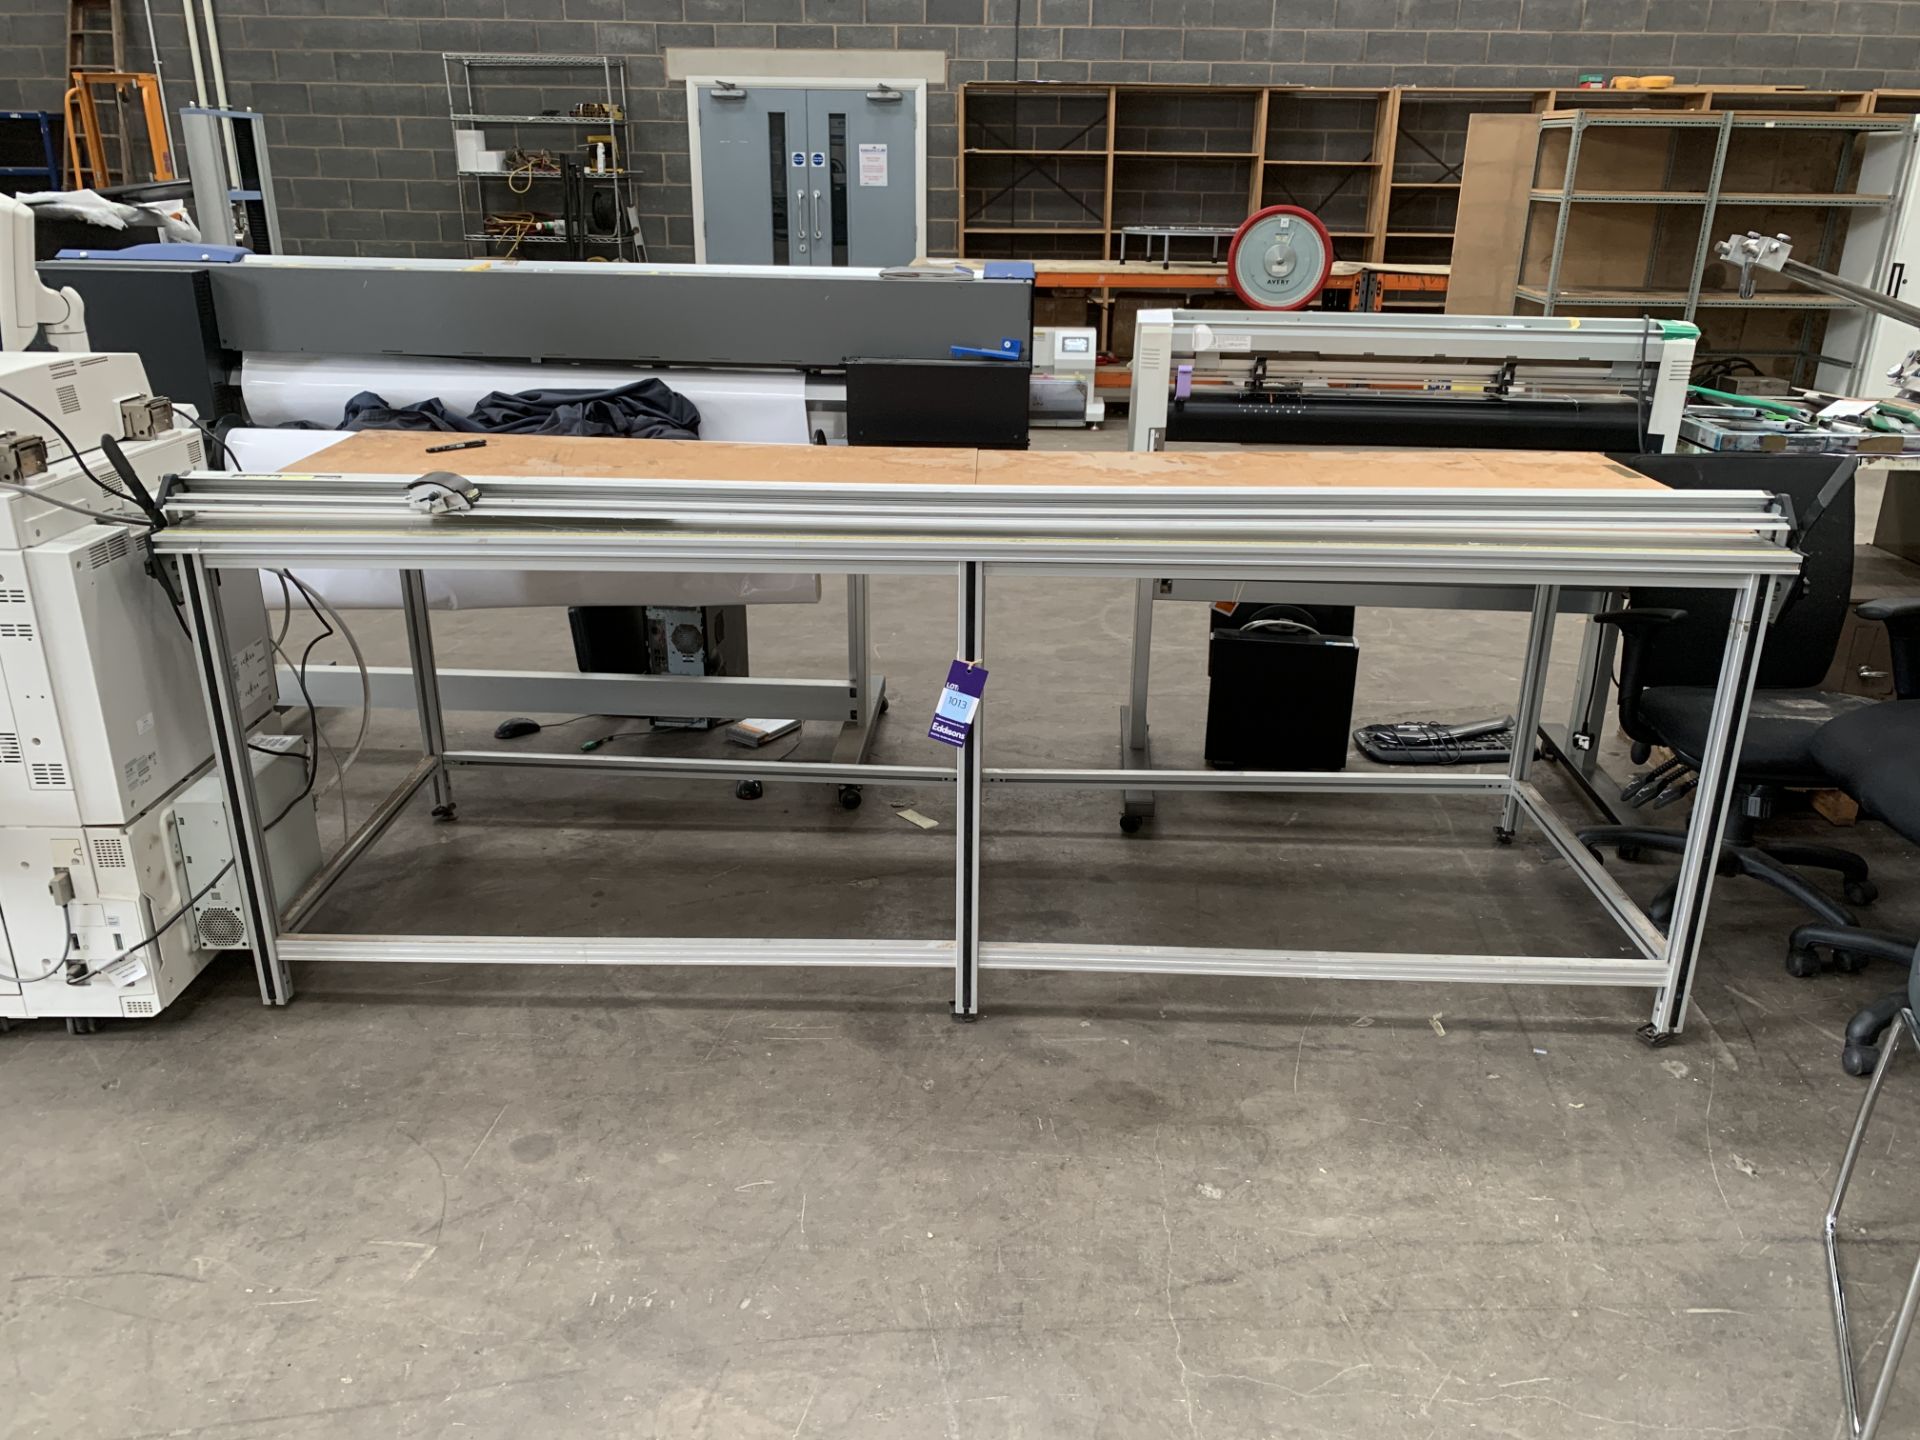 Keencut Javelin 8.5ft/2550mm Guillotine Fitted to Worktable